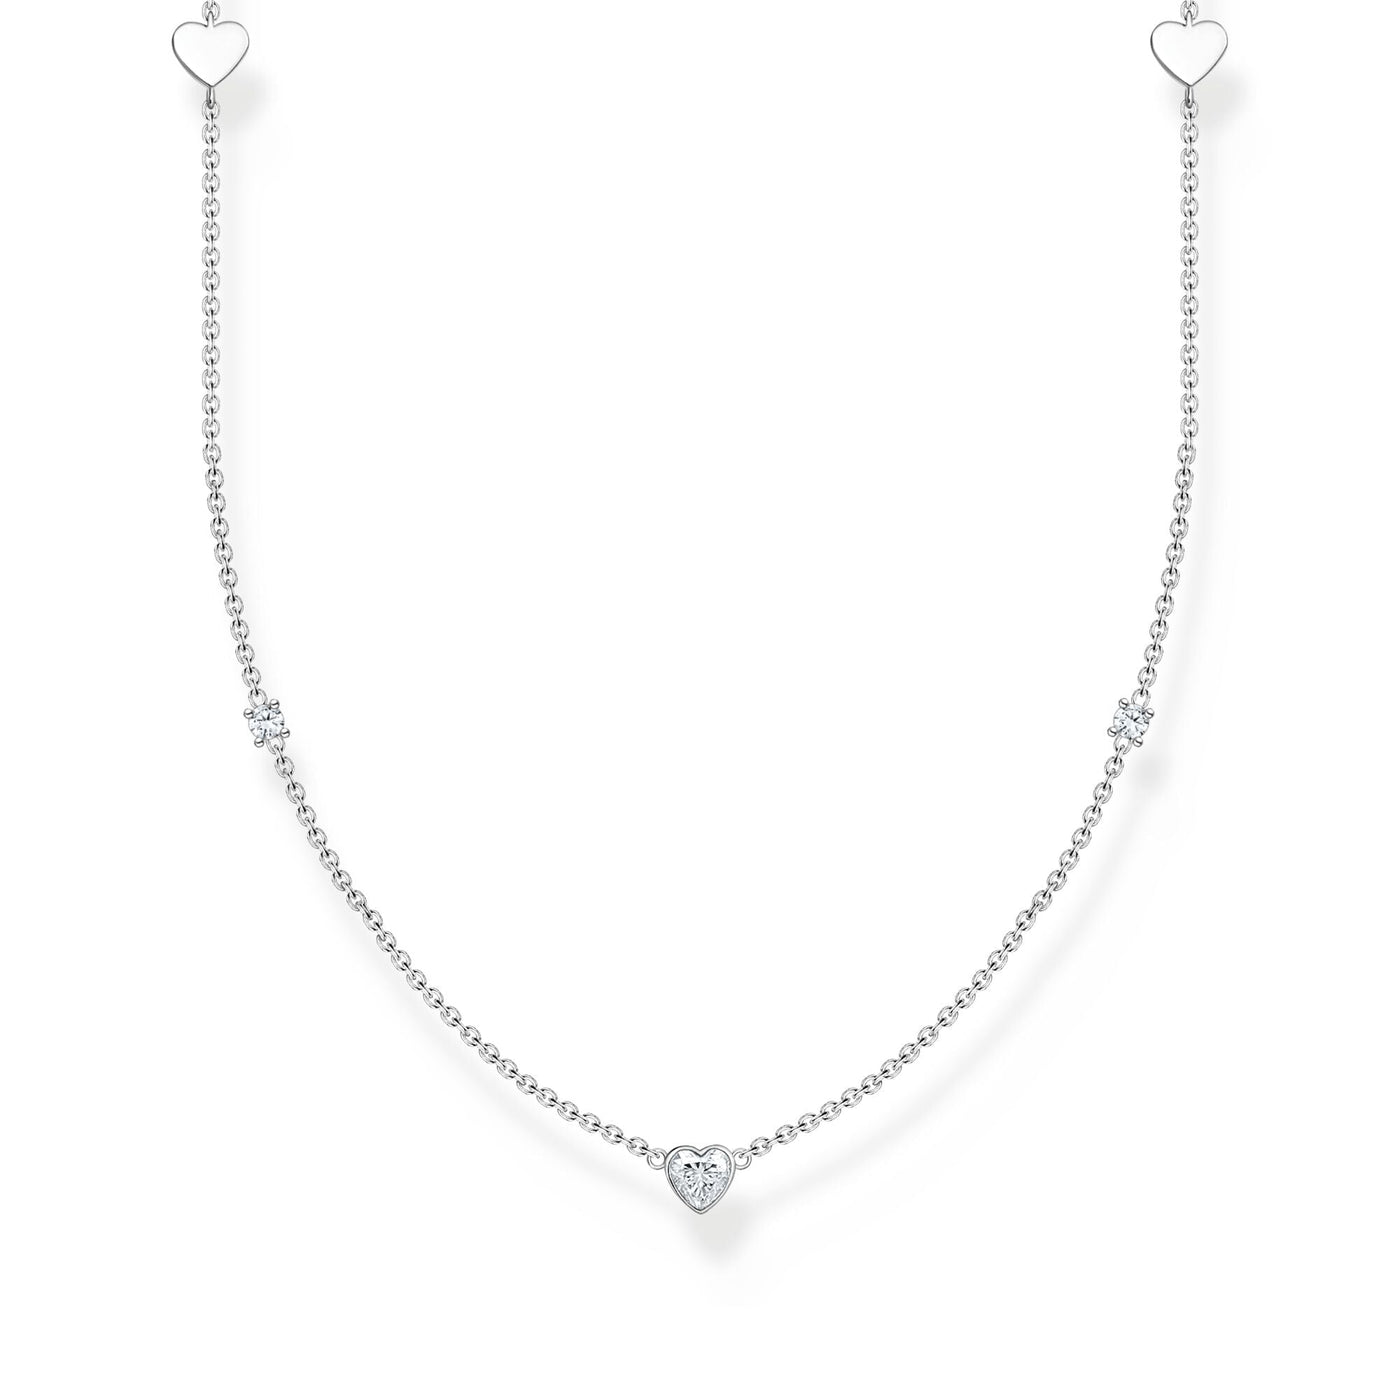 Thomas Sabo Necklace with hearts and white stones silver